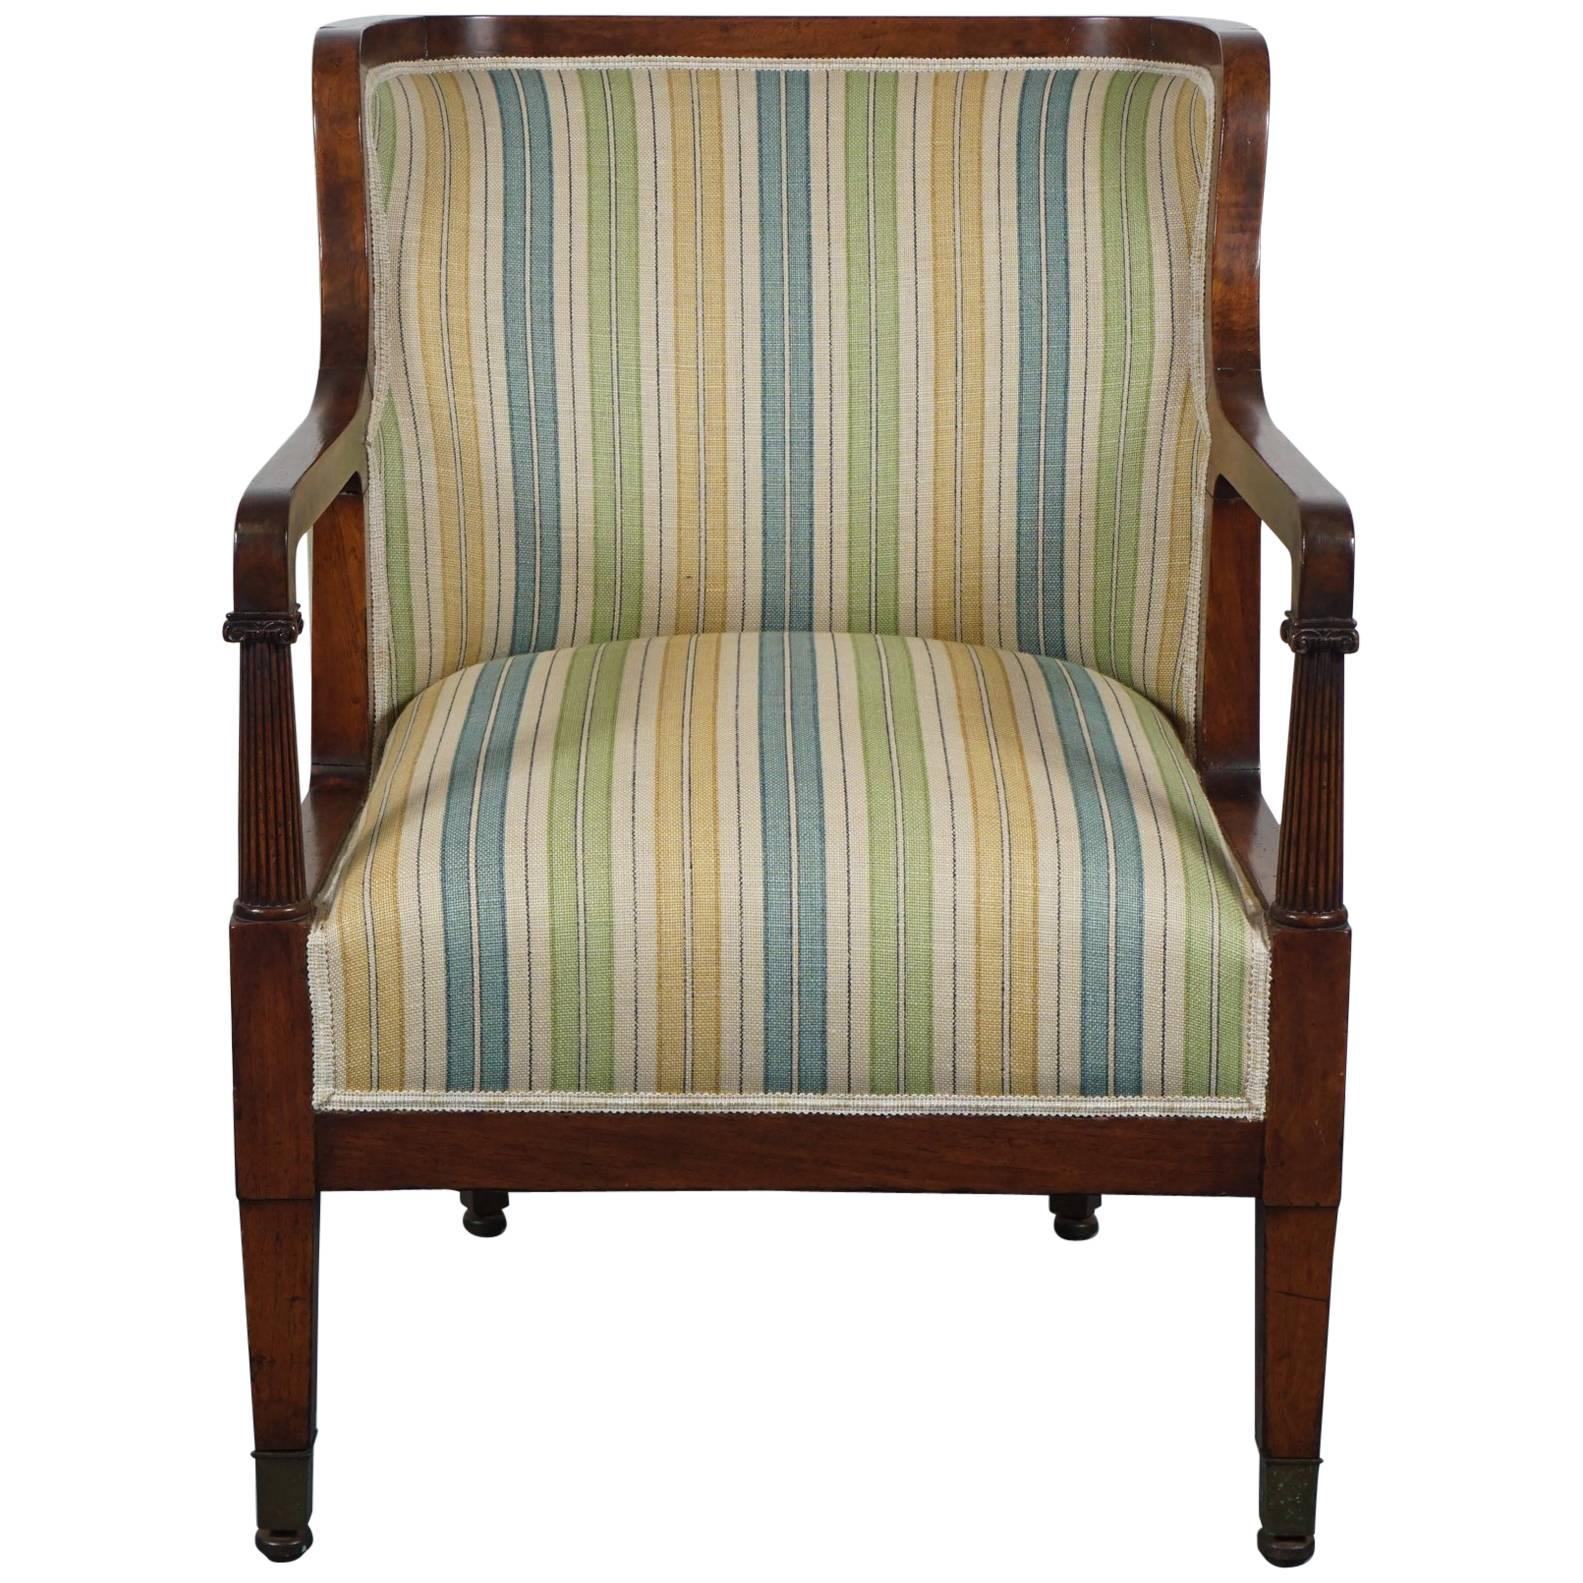 Empire Mahogany Chair in Striped Fabric For Sale